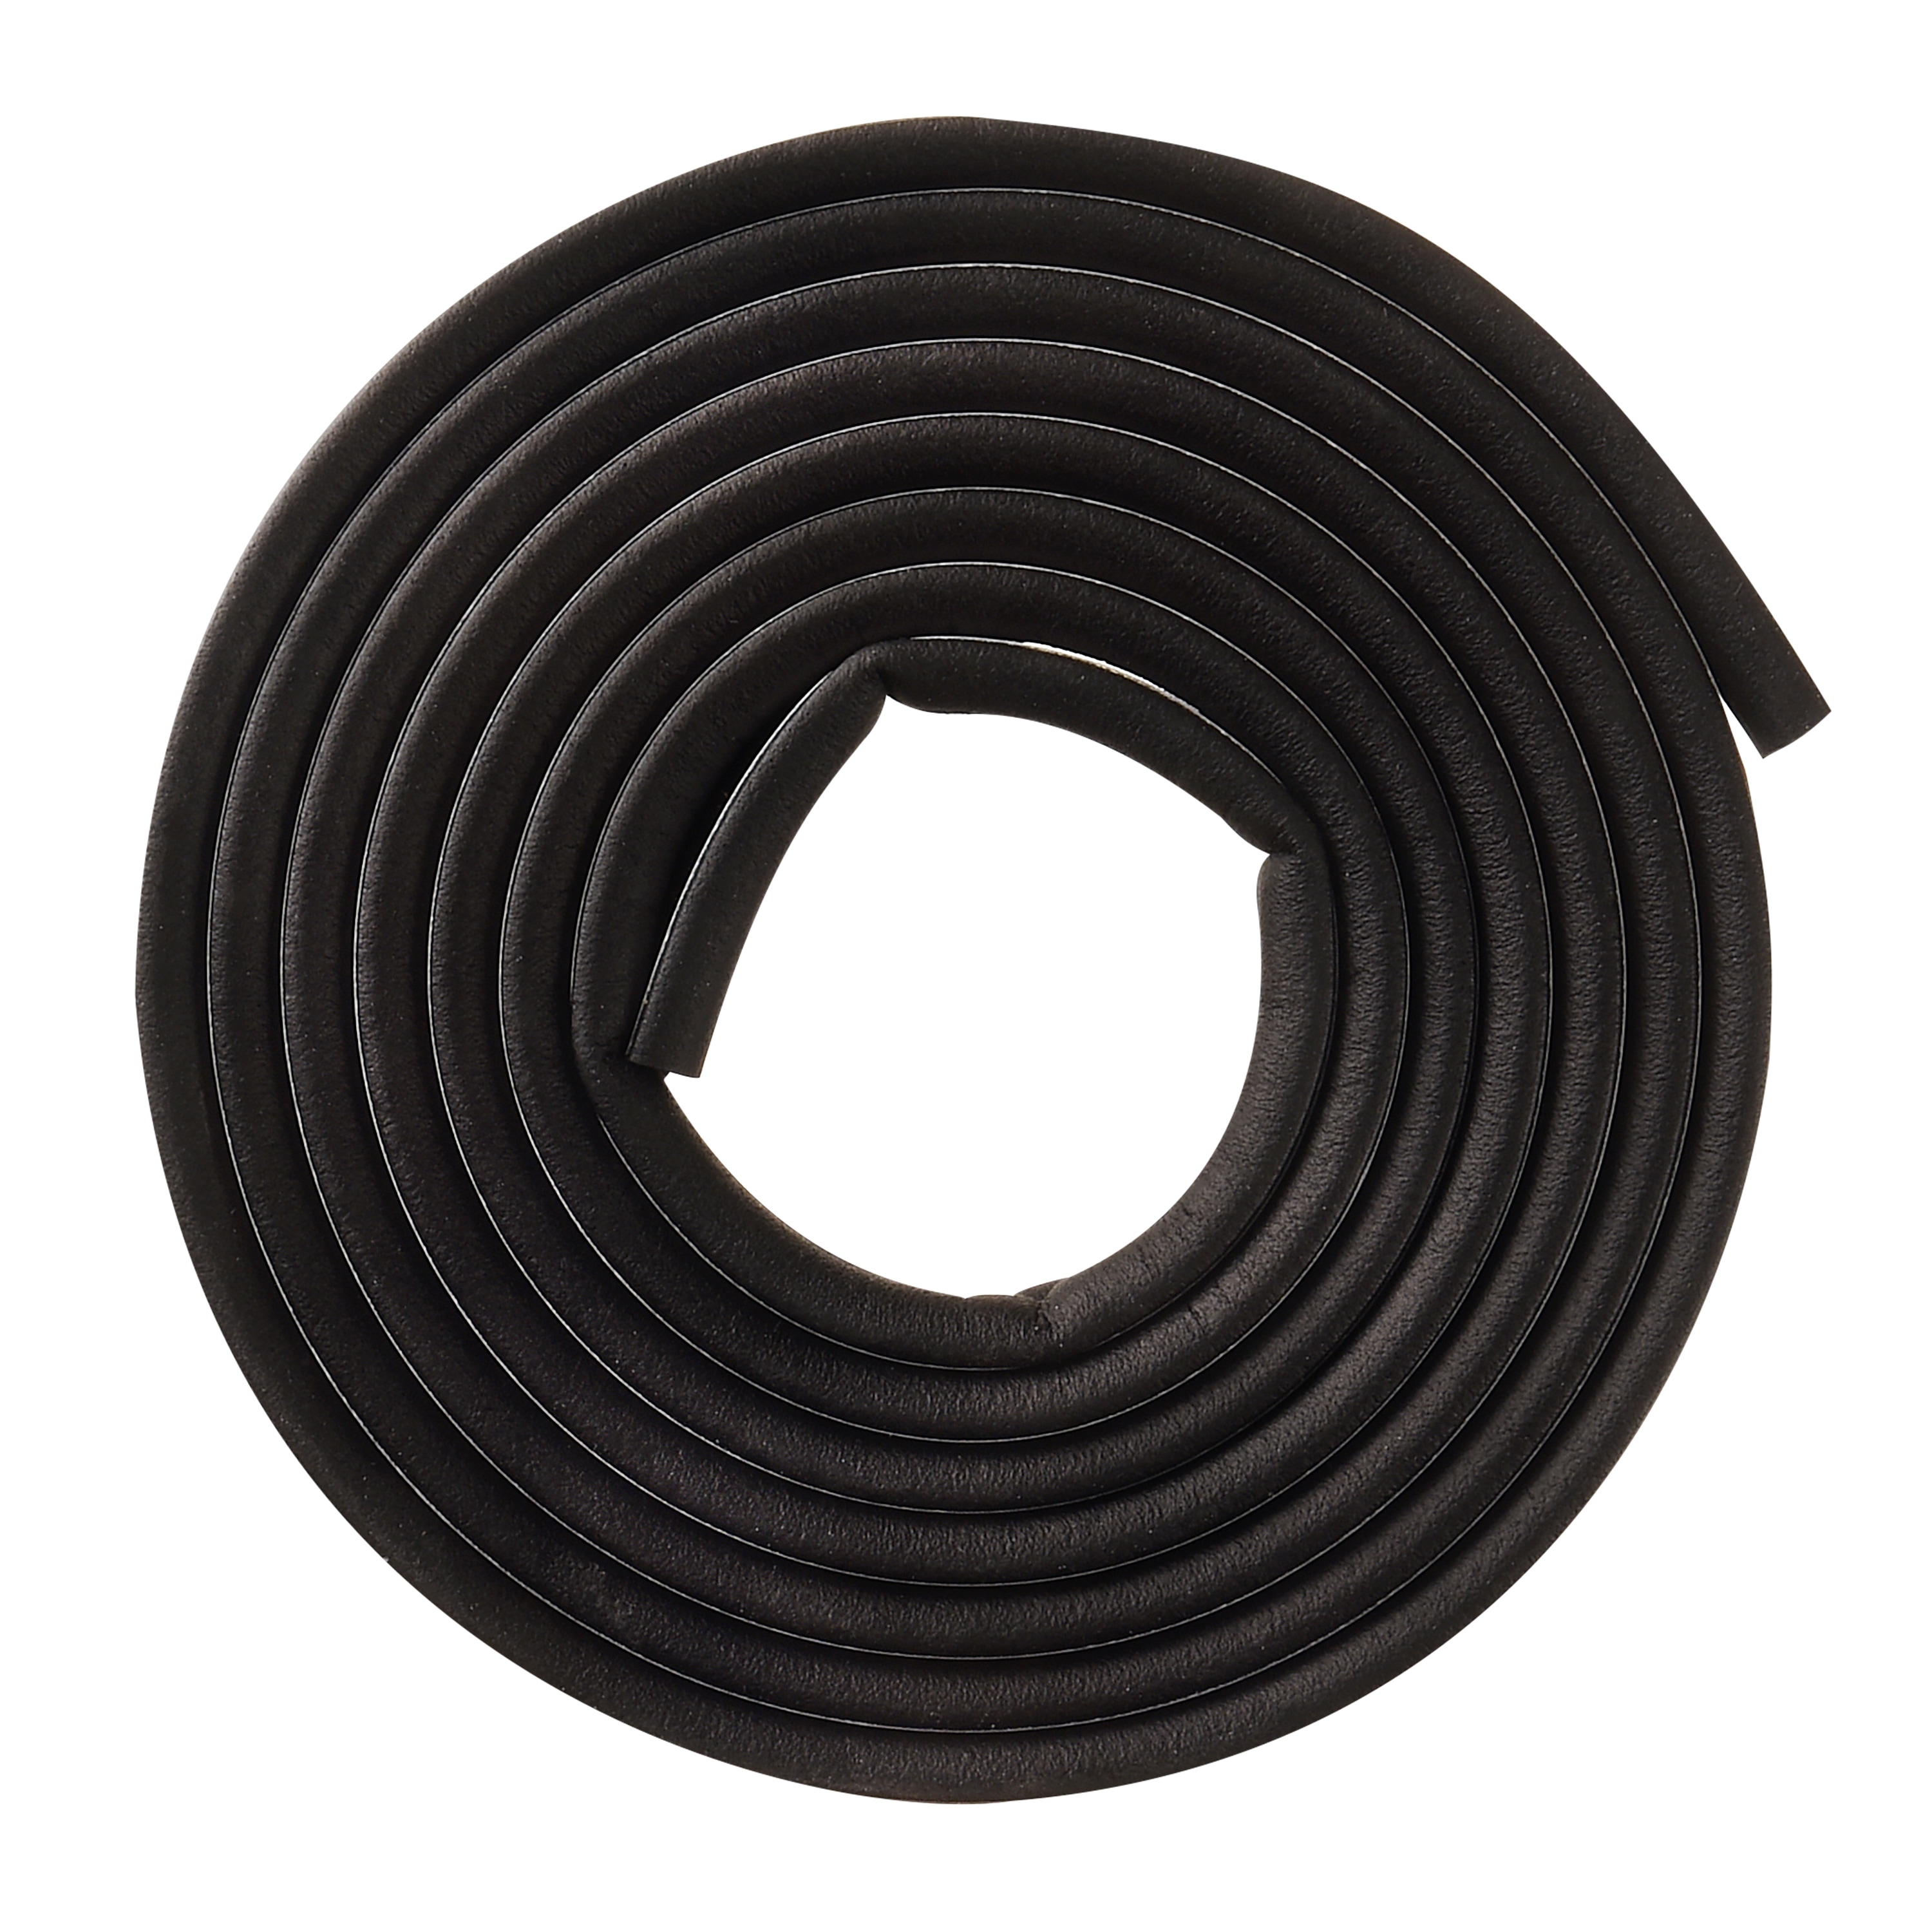 Frost King R738 7/16 Inch By 10 Foot Black Rubber Foam Weather Seal With  Self Stick Tape: Self Stick Rubber, Silicone, EDPM Weather Strip  (077578012230-2)